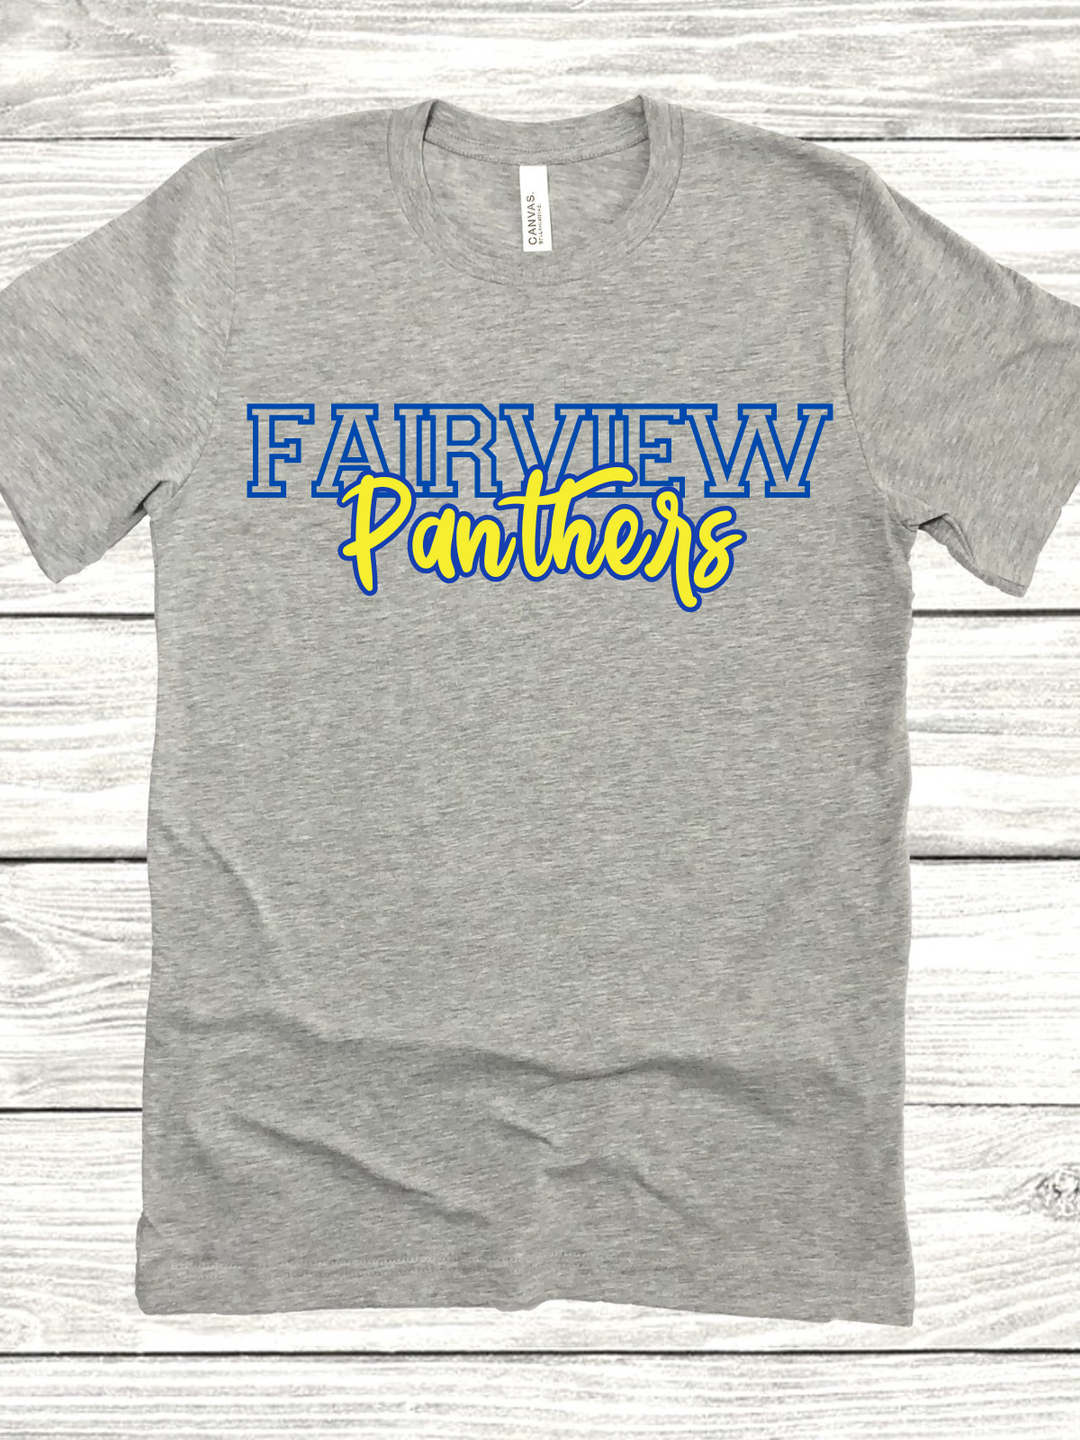 Fairview Panthers Tee